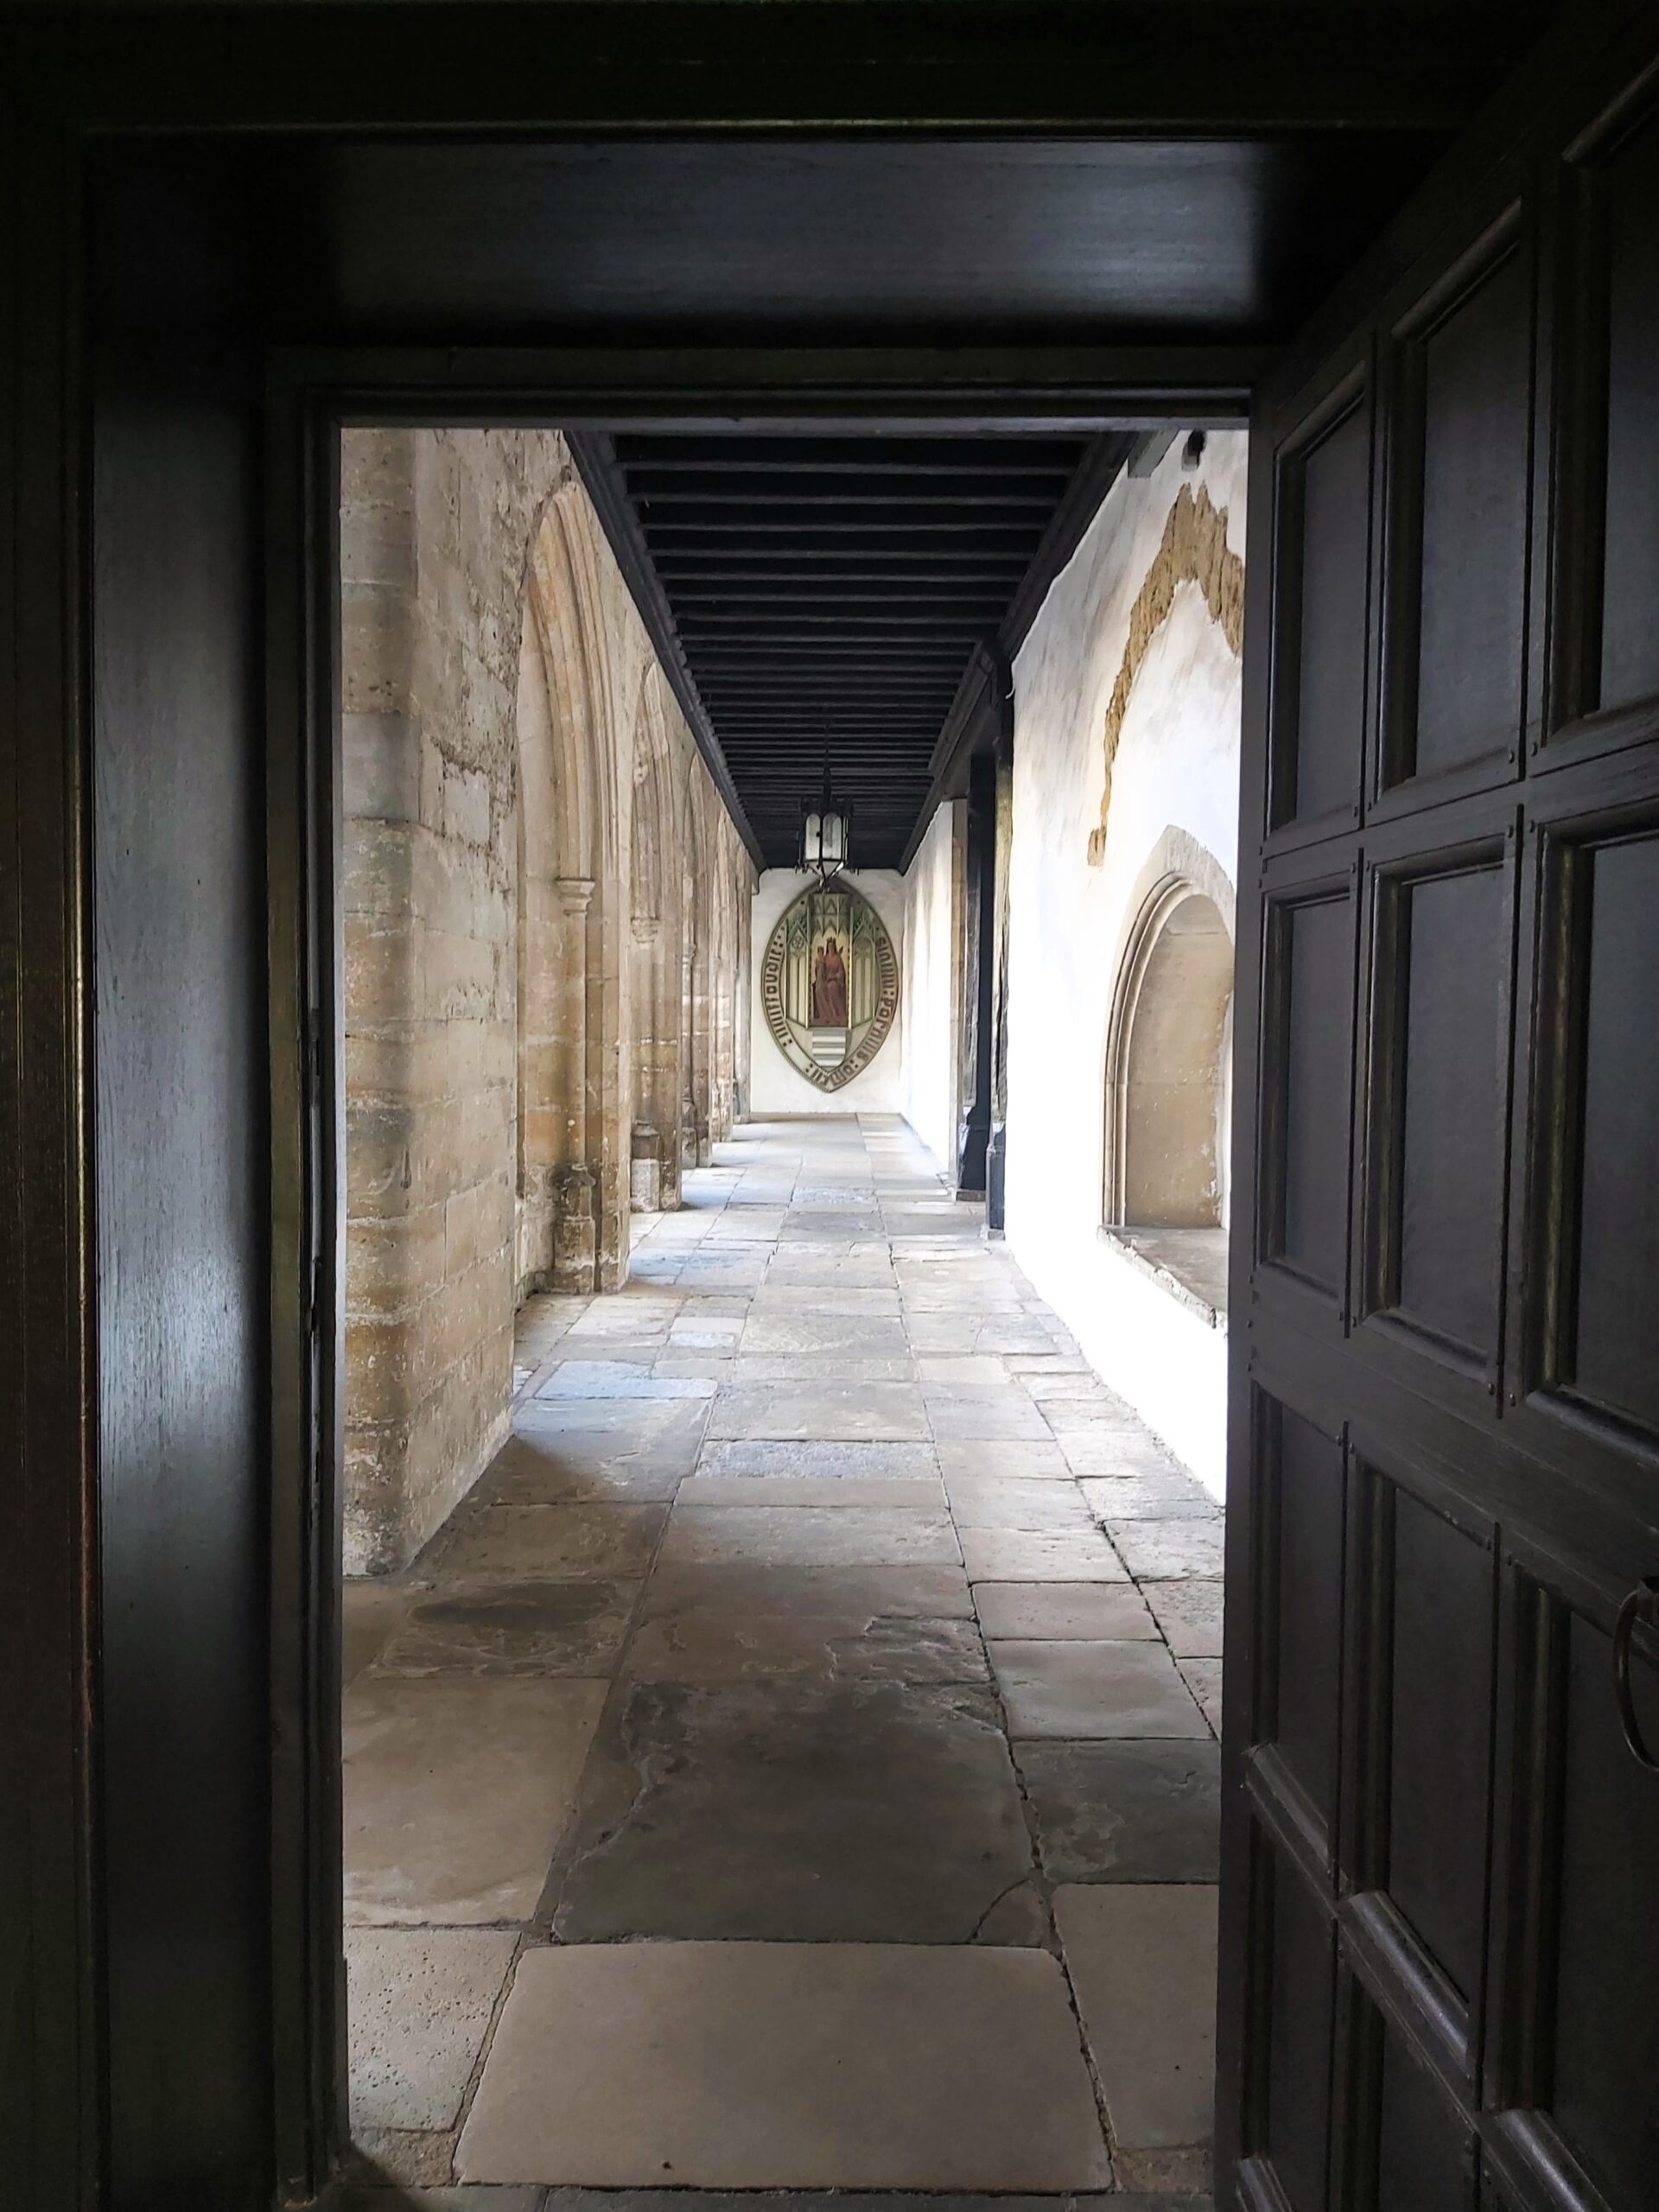 A walkway in The Friars Aylesford Priory, Kent, England